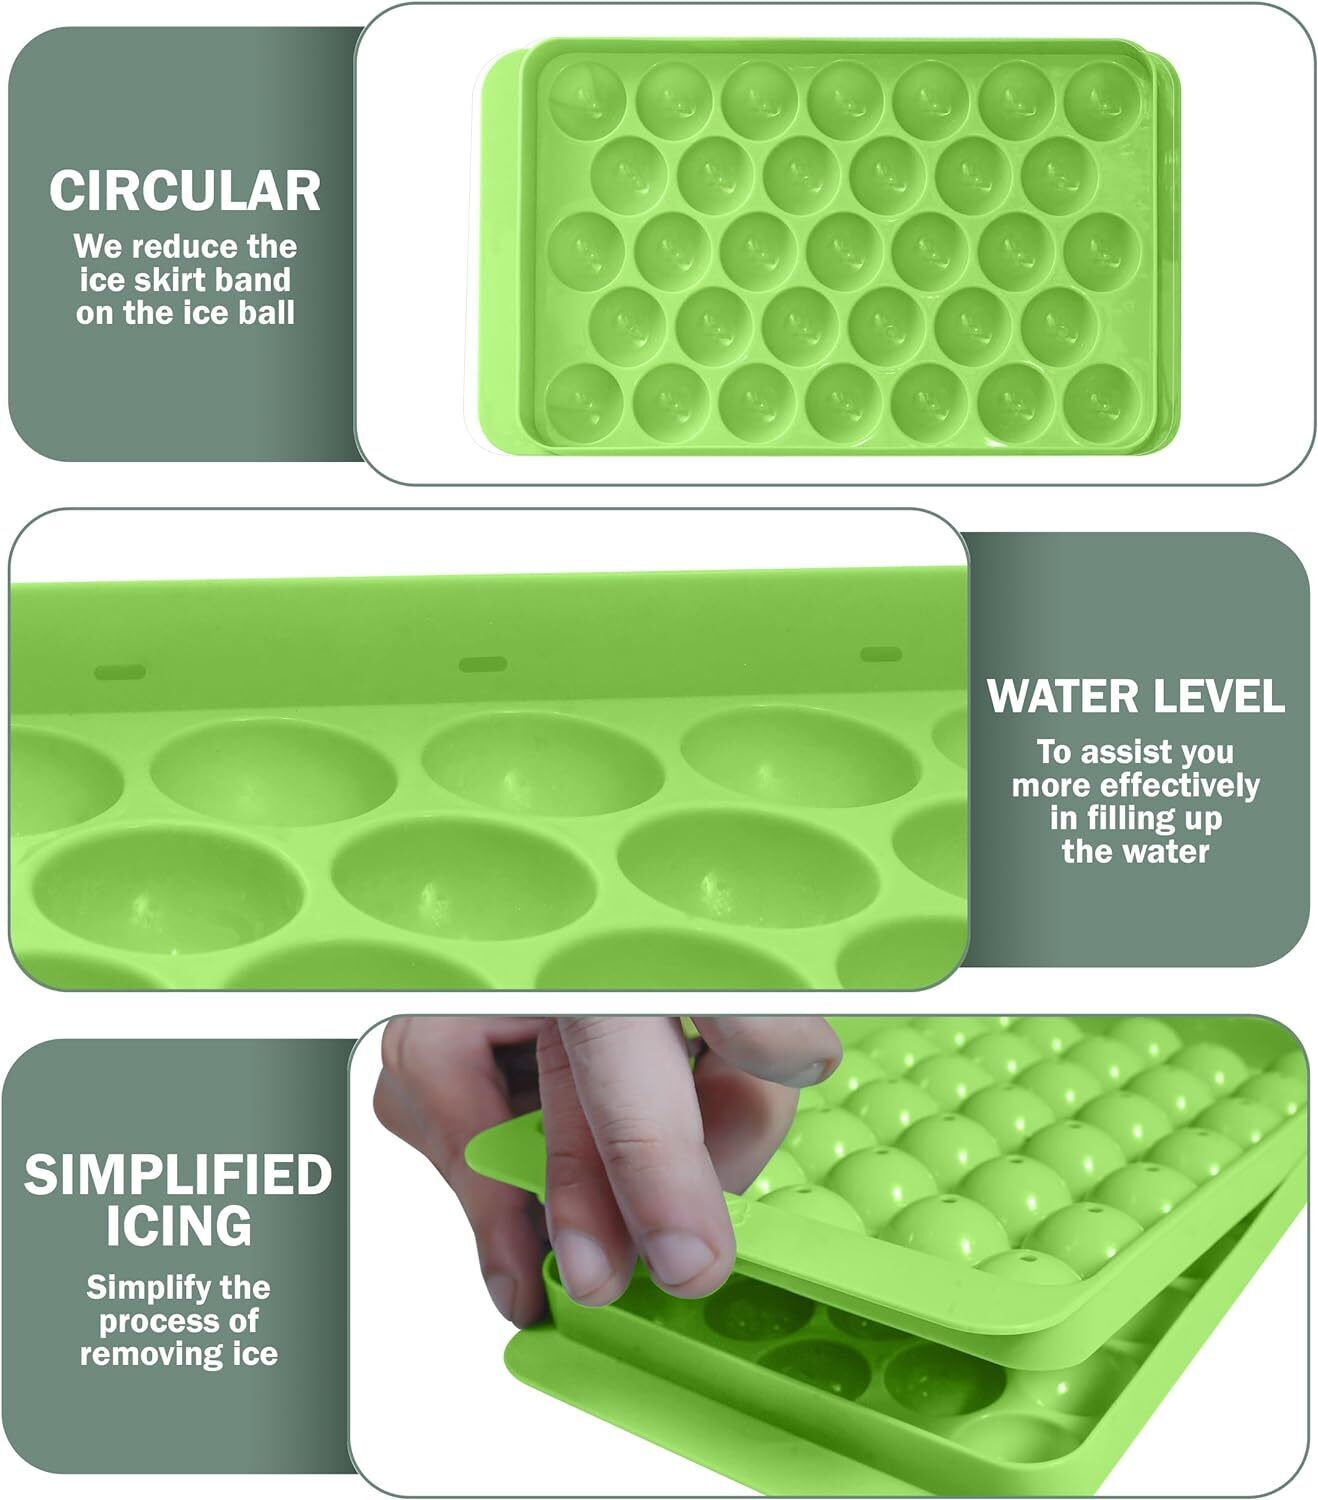 Ice Cube Tray With Lid Makes 33 Ice Balls Dish Washer Safe BPA Free - Green